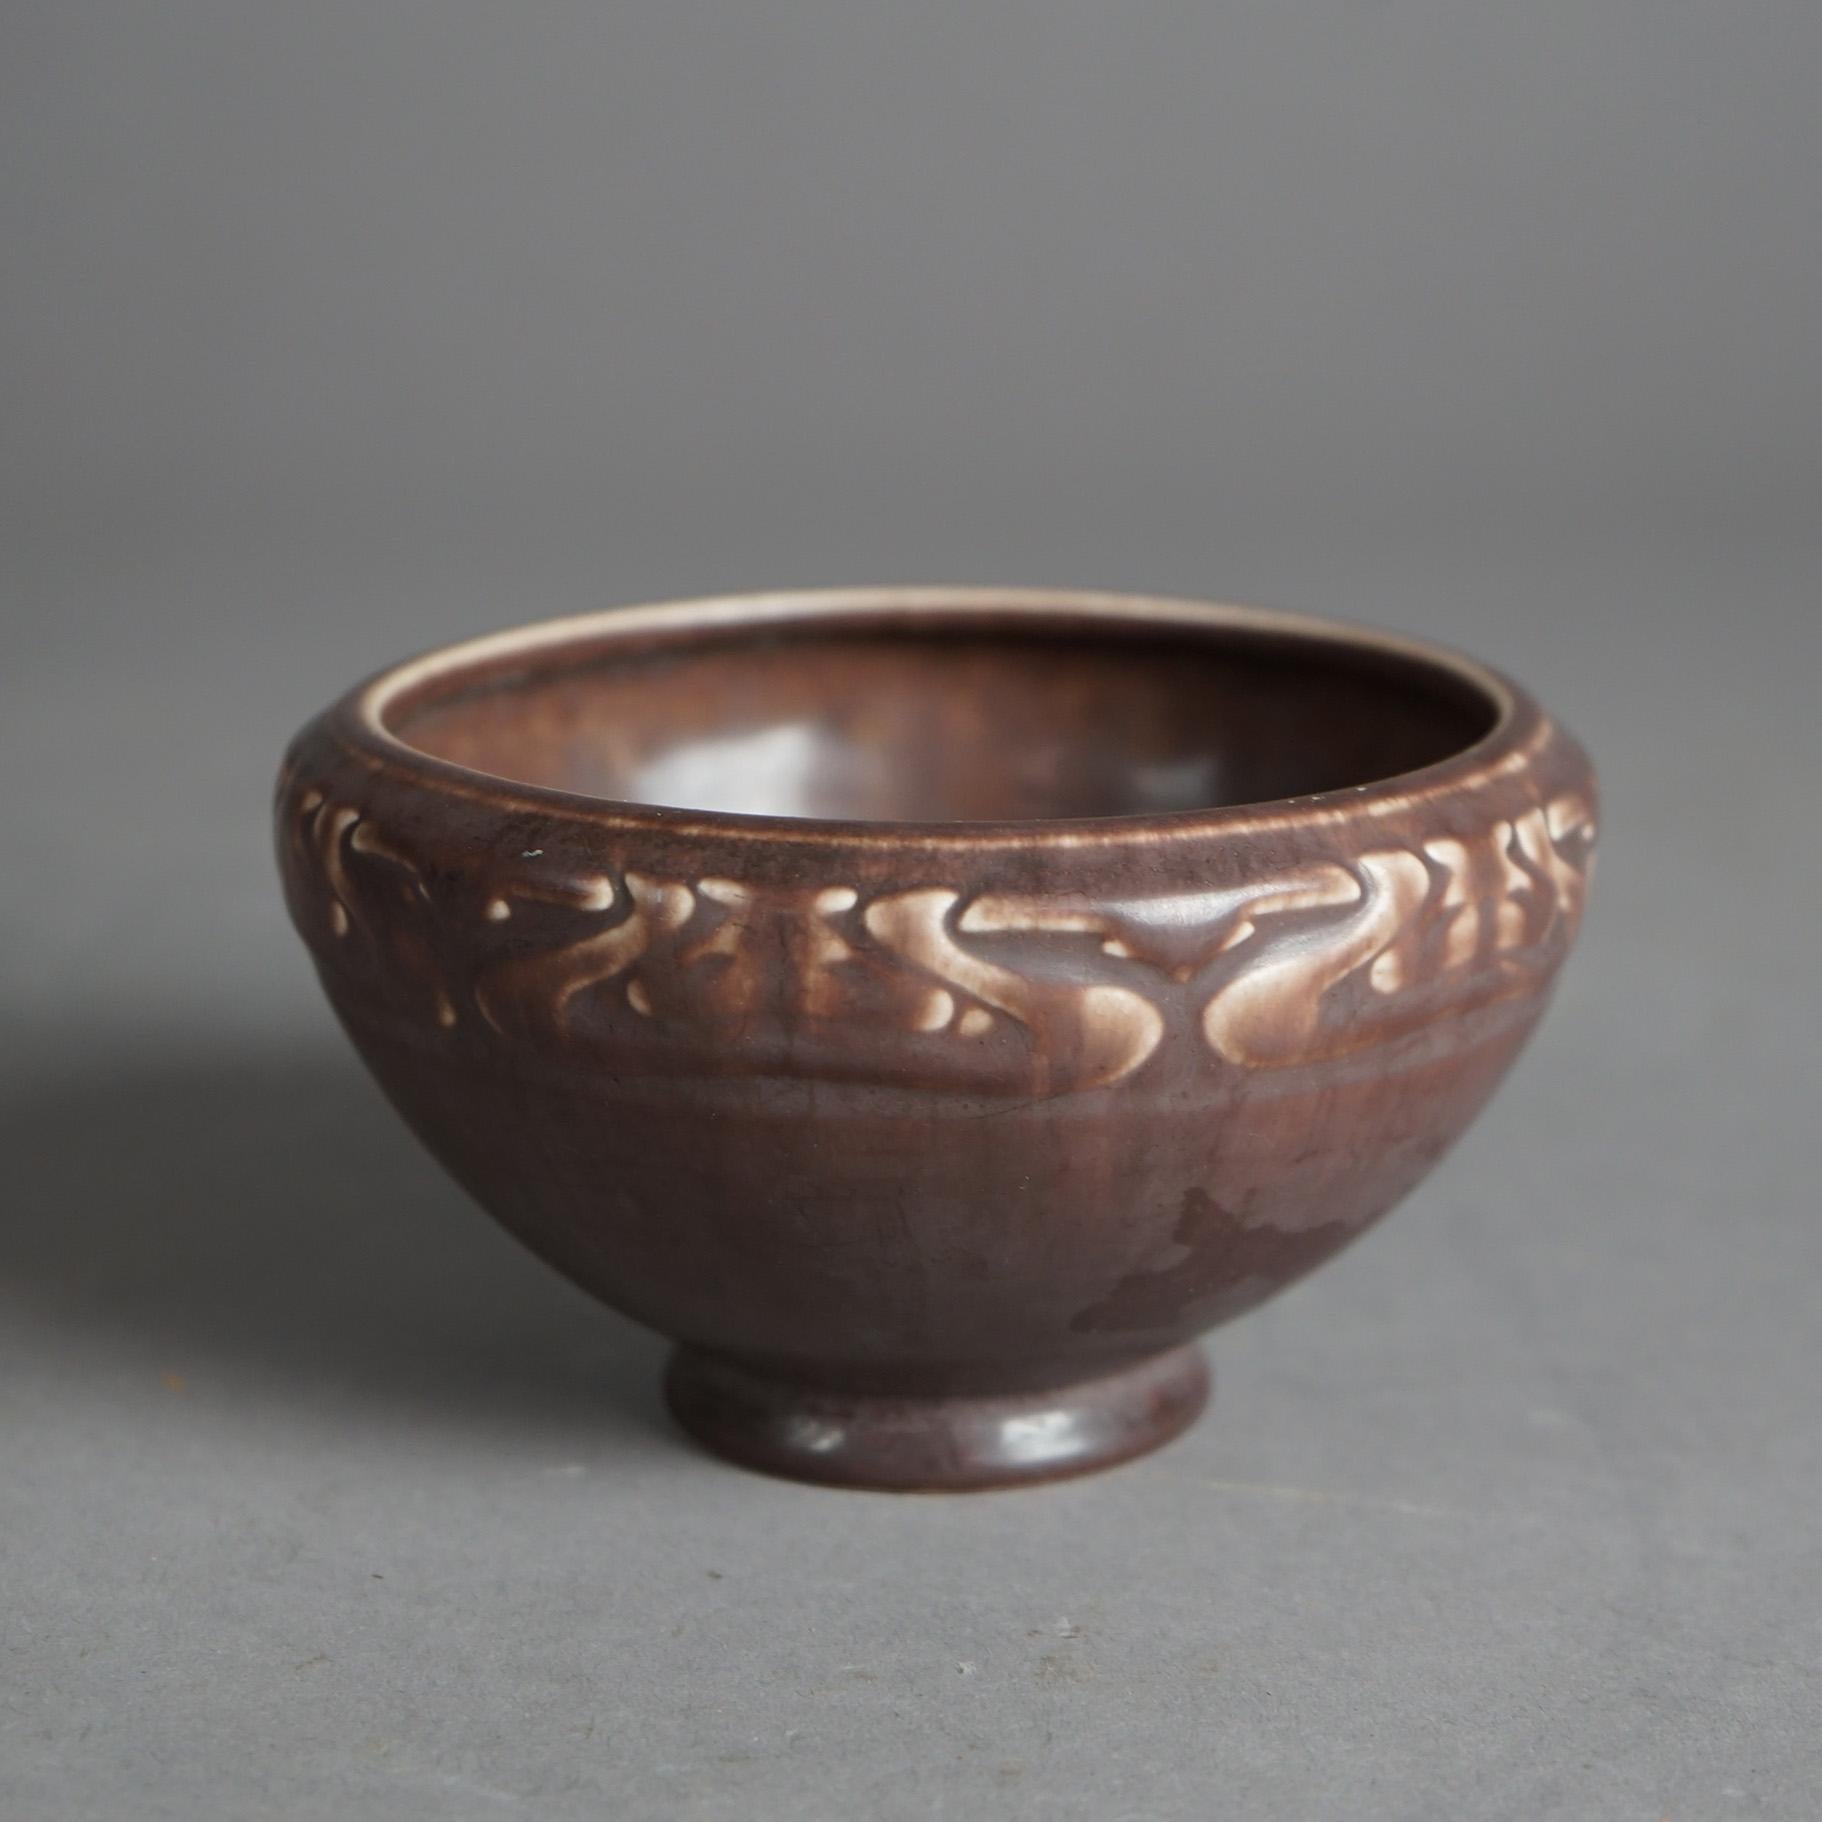  Antique Arts & Crafts Rookwood Art Pottery Bowl Dated 1921 In Good Condition For Sale In Big Flats, NY